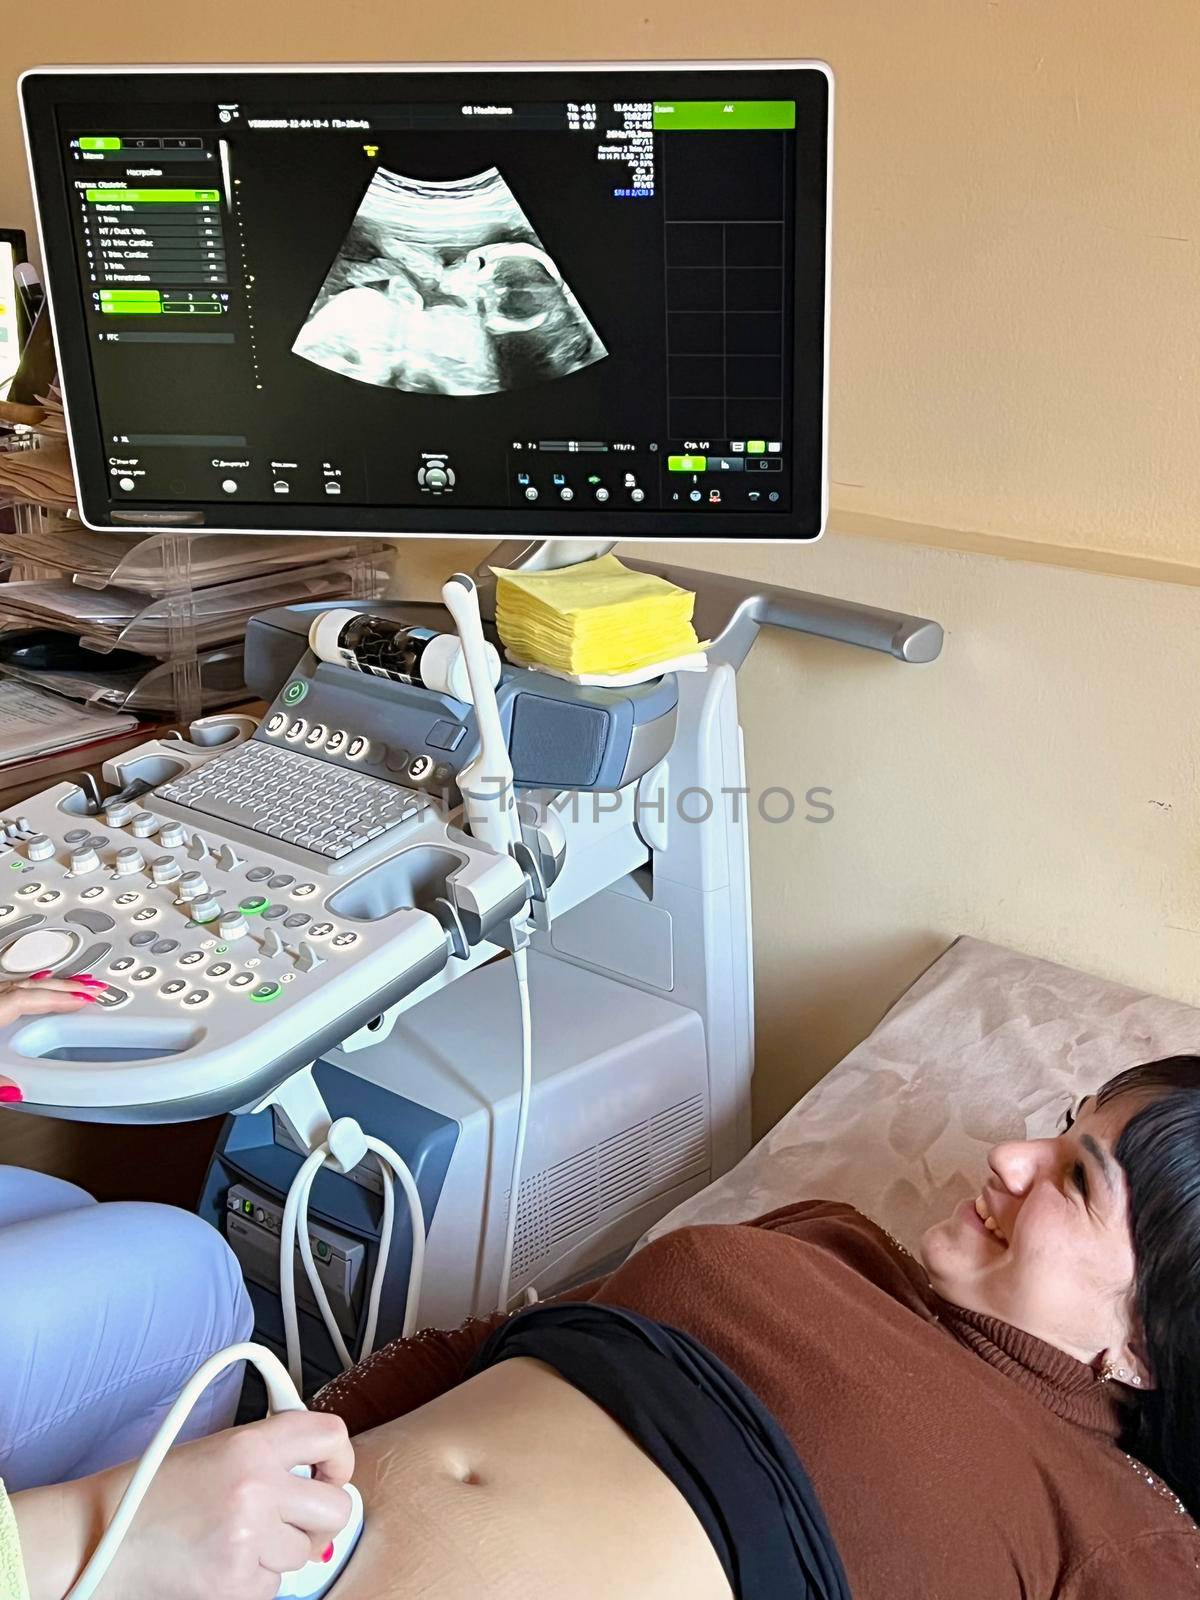 pregnant girl on ultrasound. Obstetrician Pushes Buttons on a Control Panel Before Starting Ultrasound Sonogram Procedure. Skillful sonographer using ultrasound machine at work. pregnancy examination